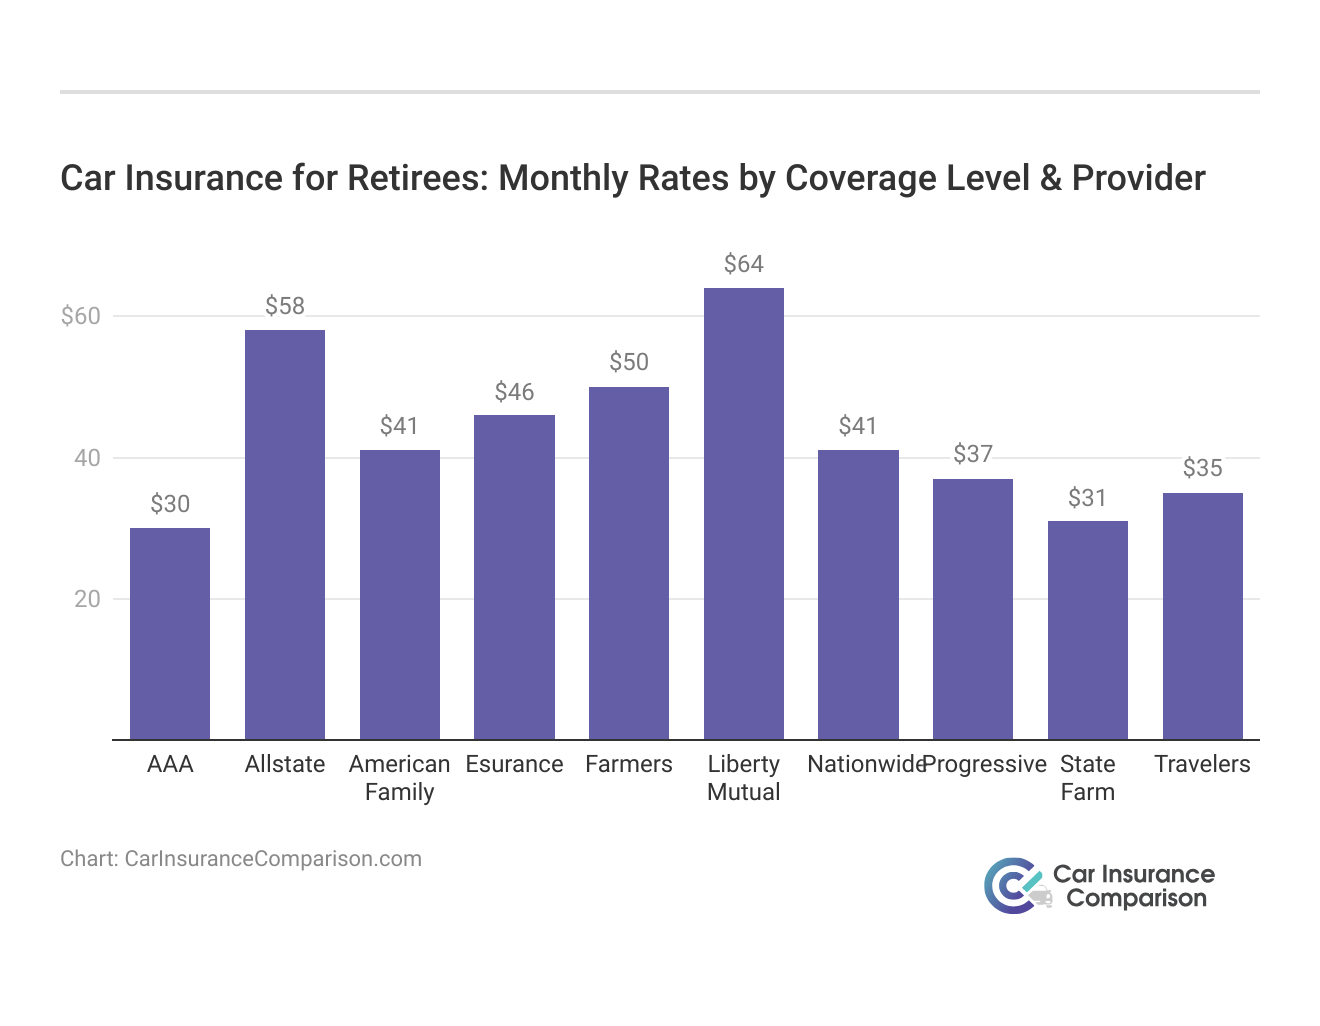 <h3>Car Insurance for Retirees: Monthly Rates by Coverage Level & Provider</h3>